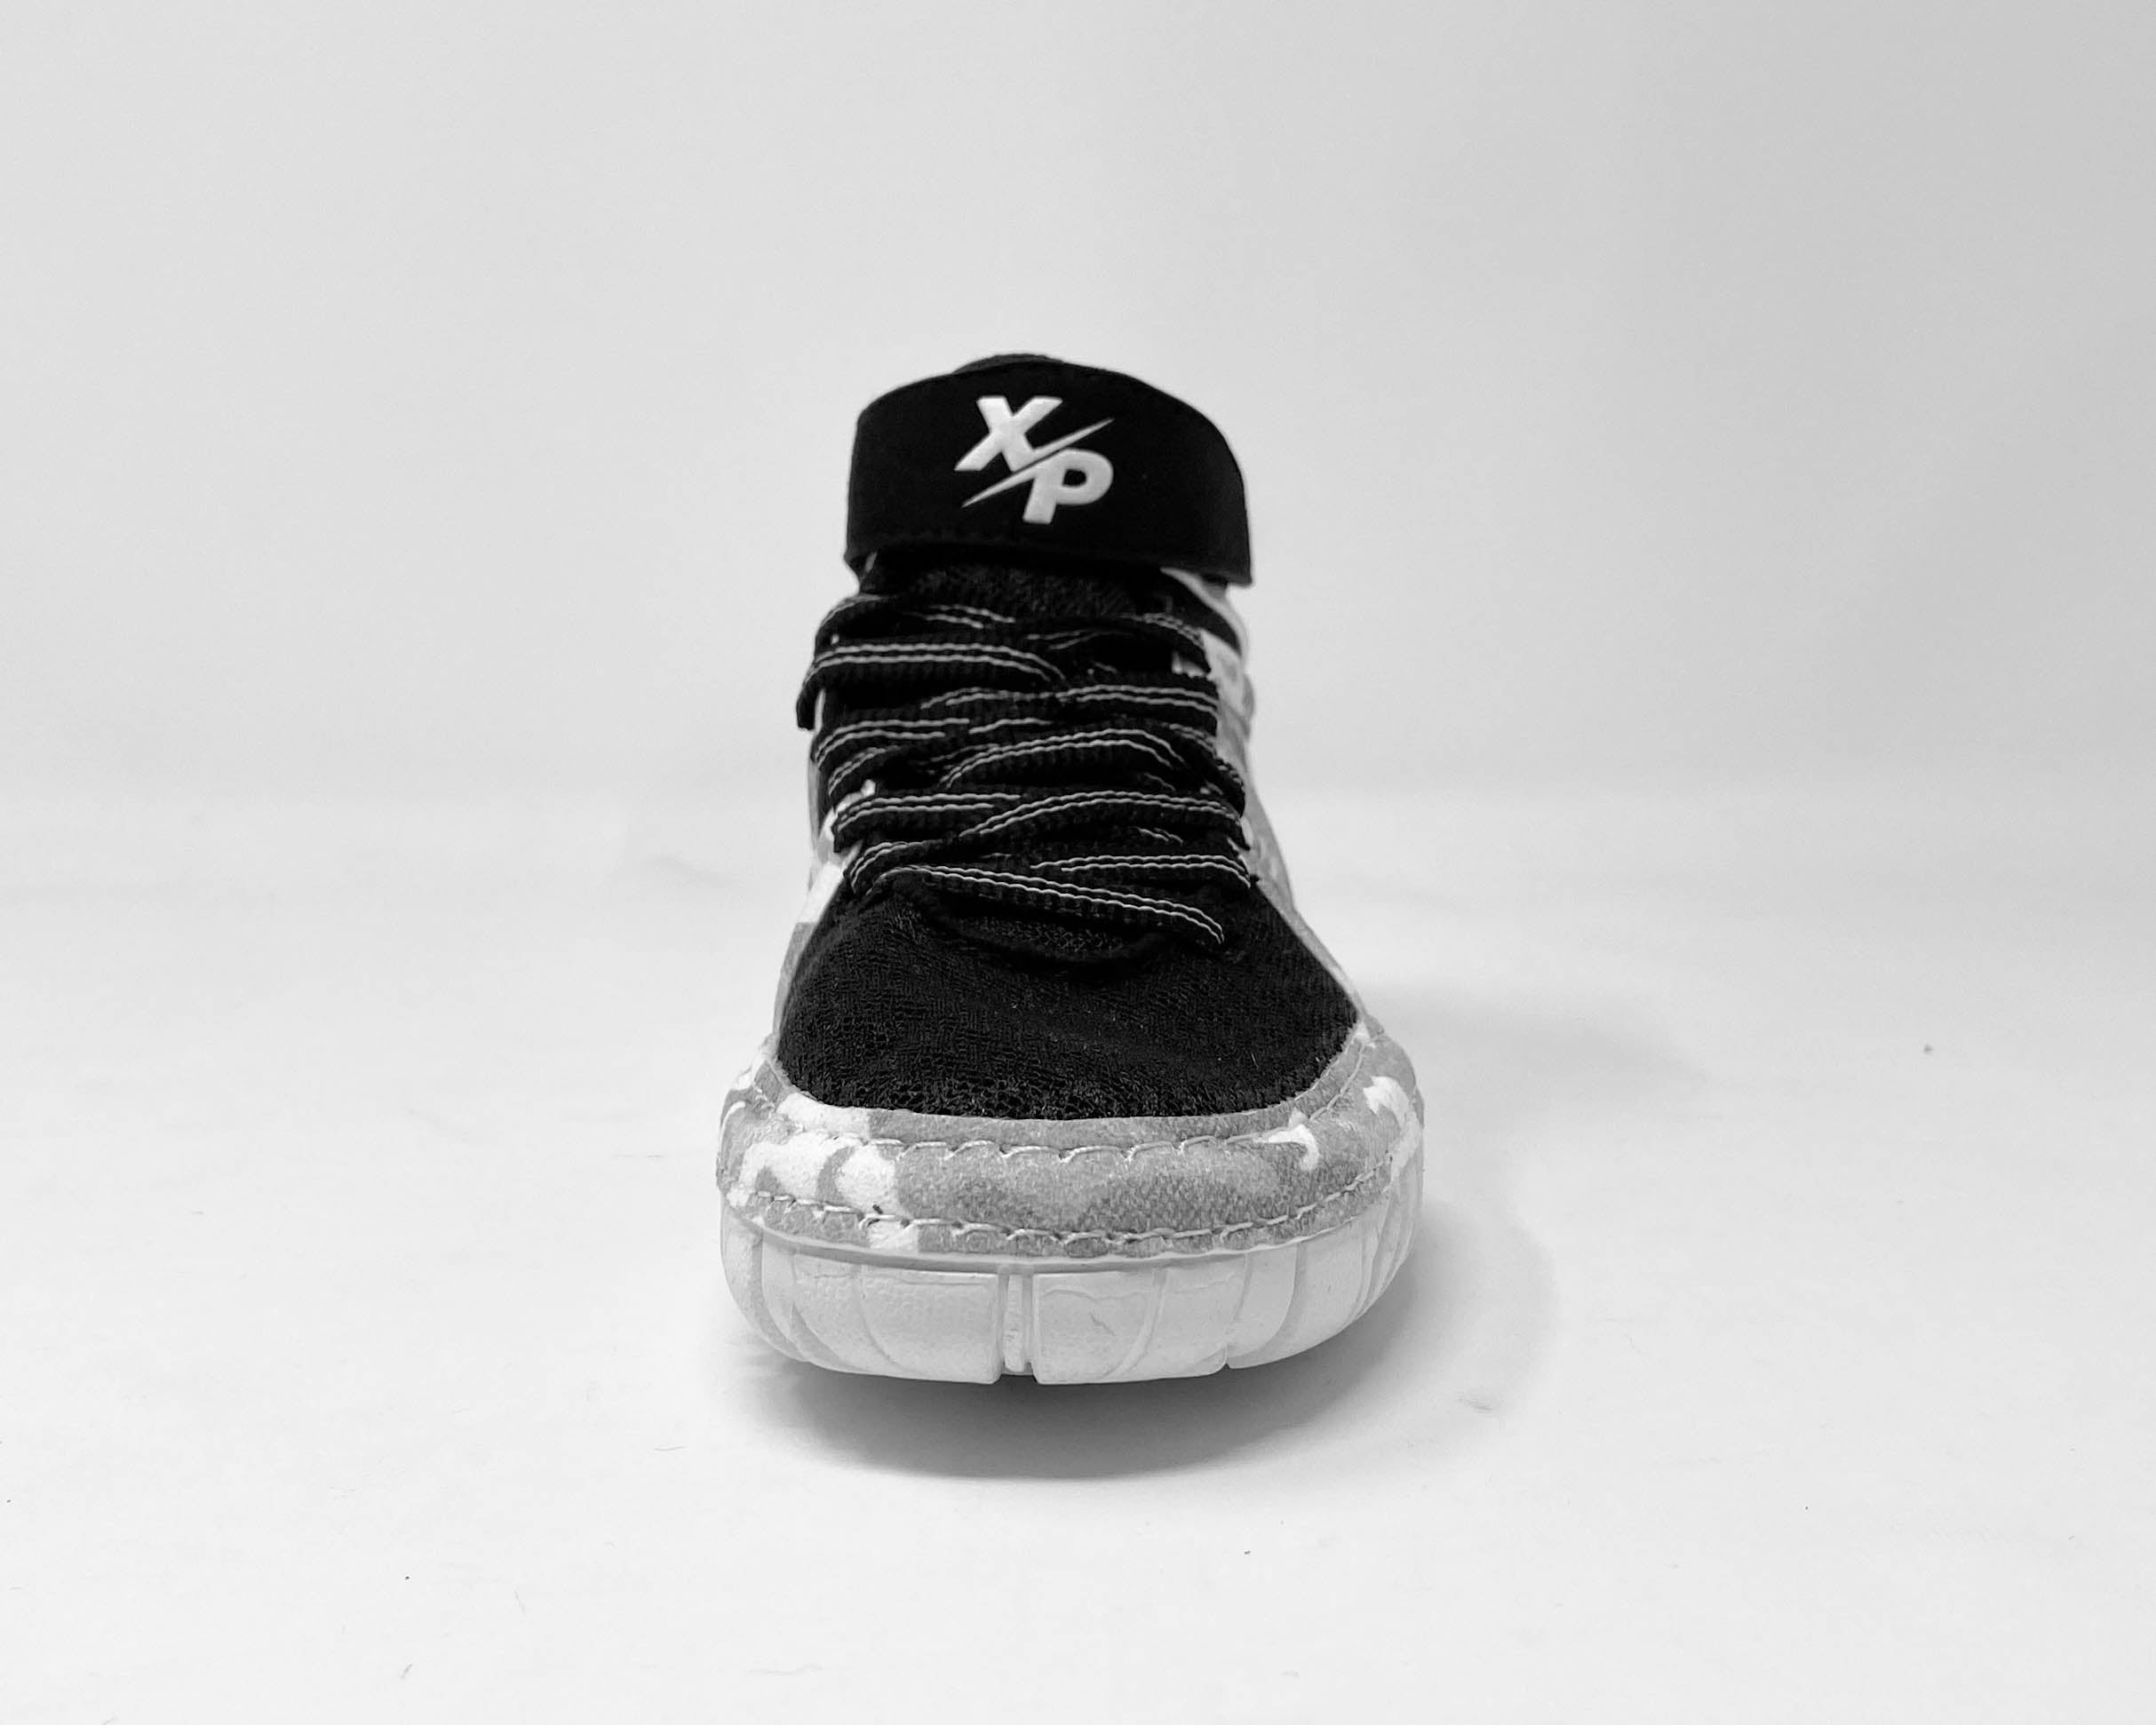 Youth MARVEL Punisher King Spec 2.0 Wrestling Shoes In Black & White Xtreme Pro Apparel